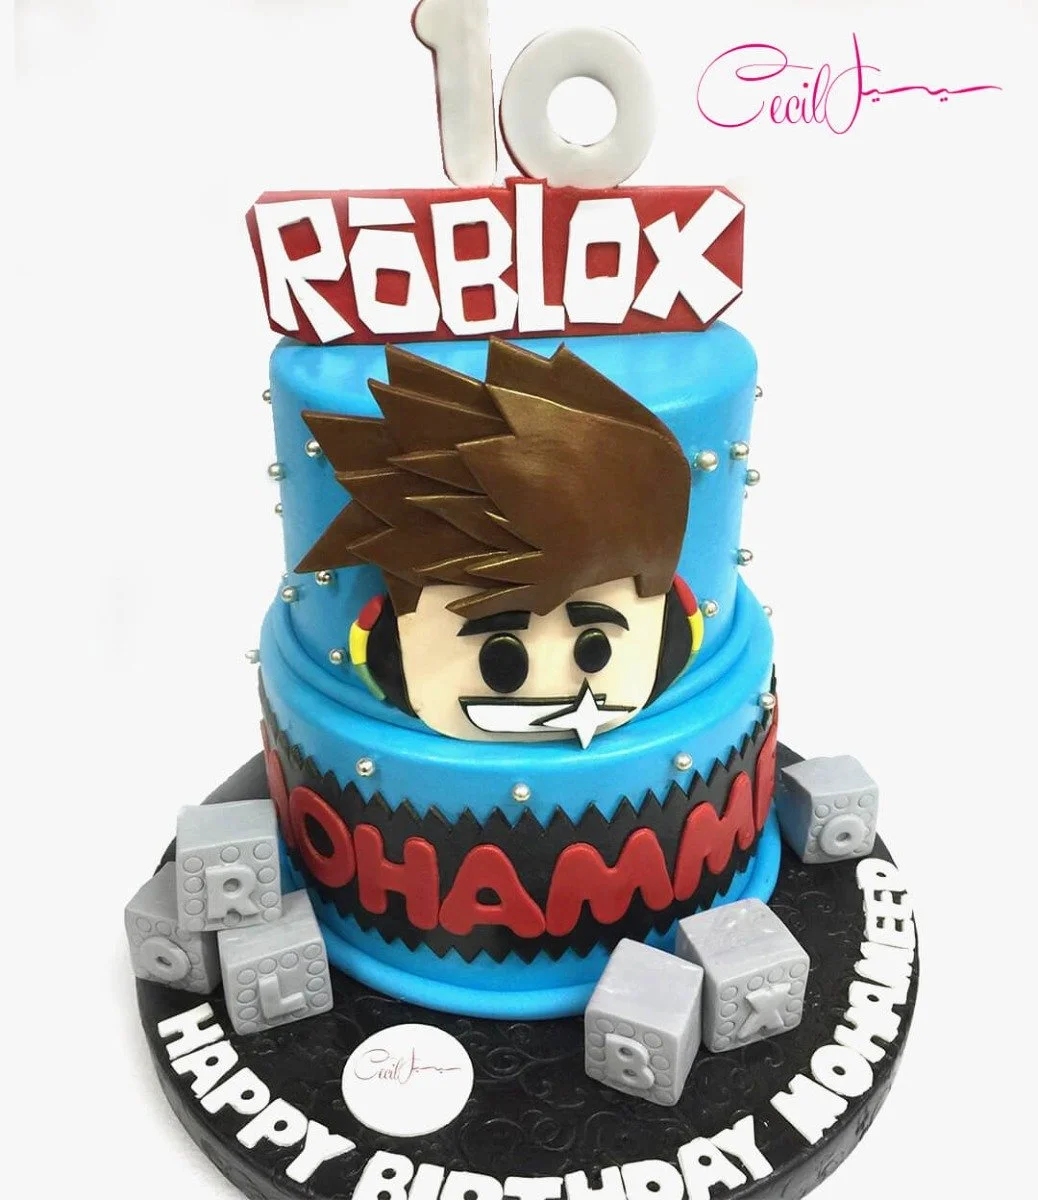 Roblox cake by Cecil